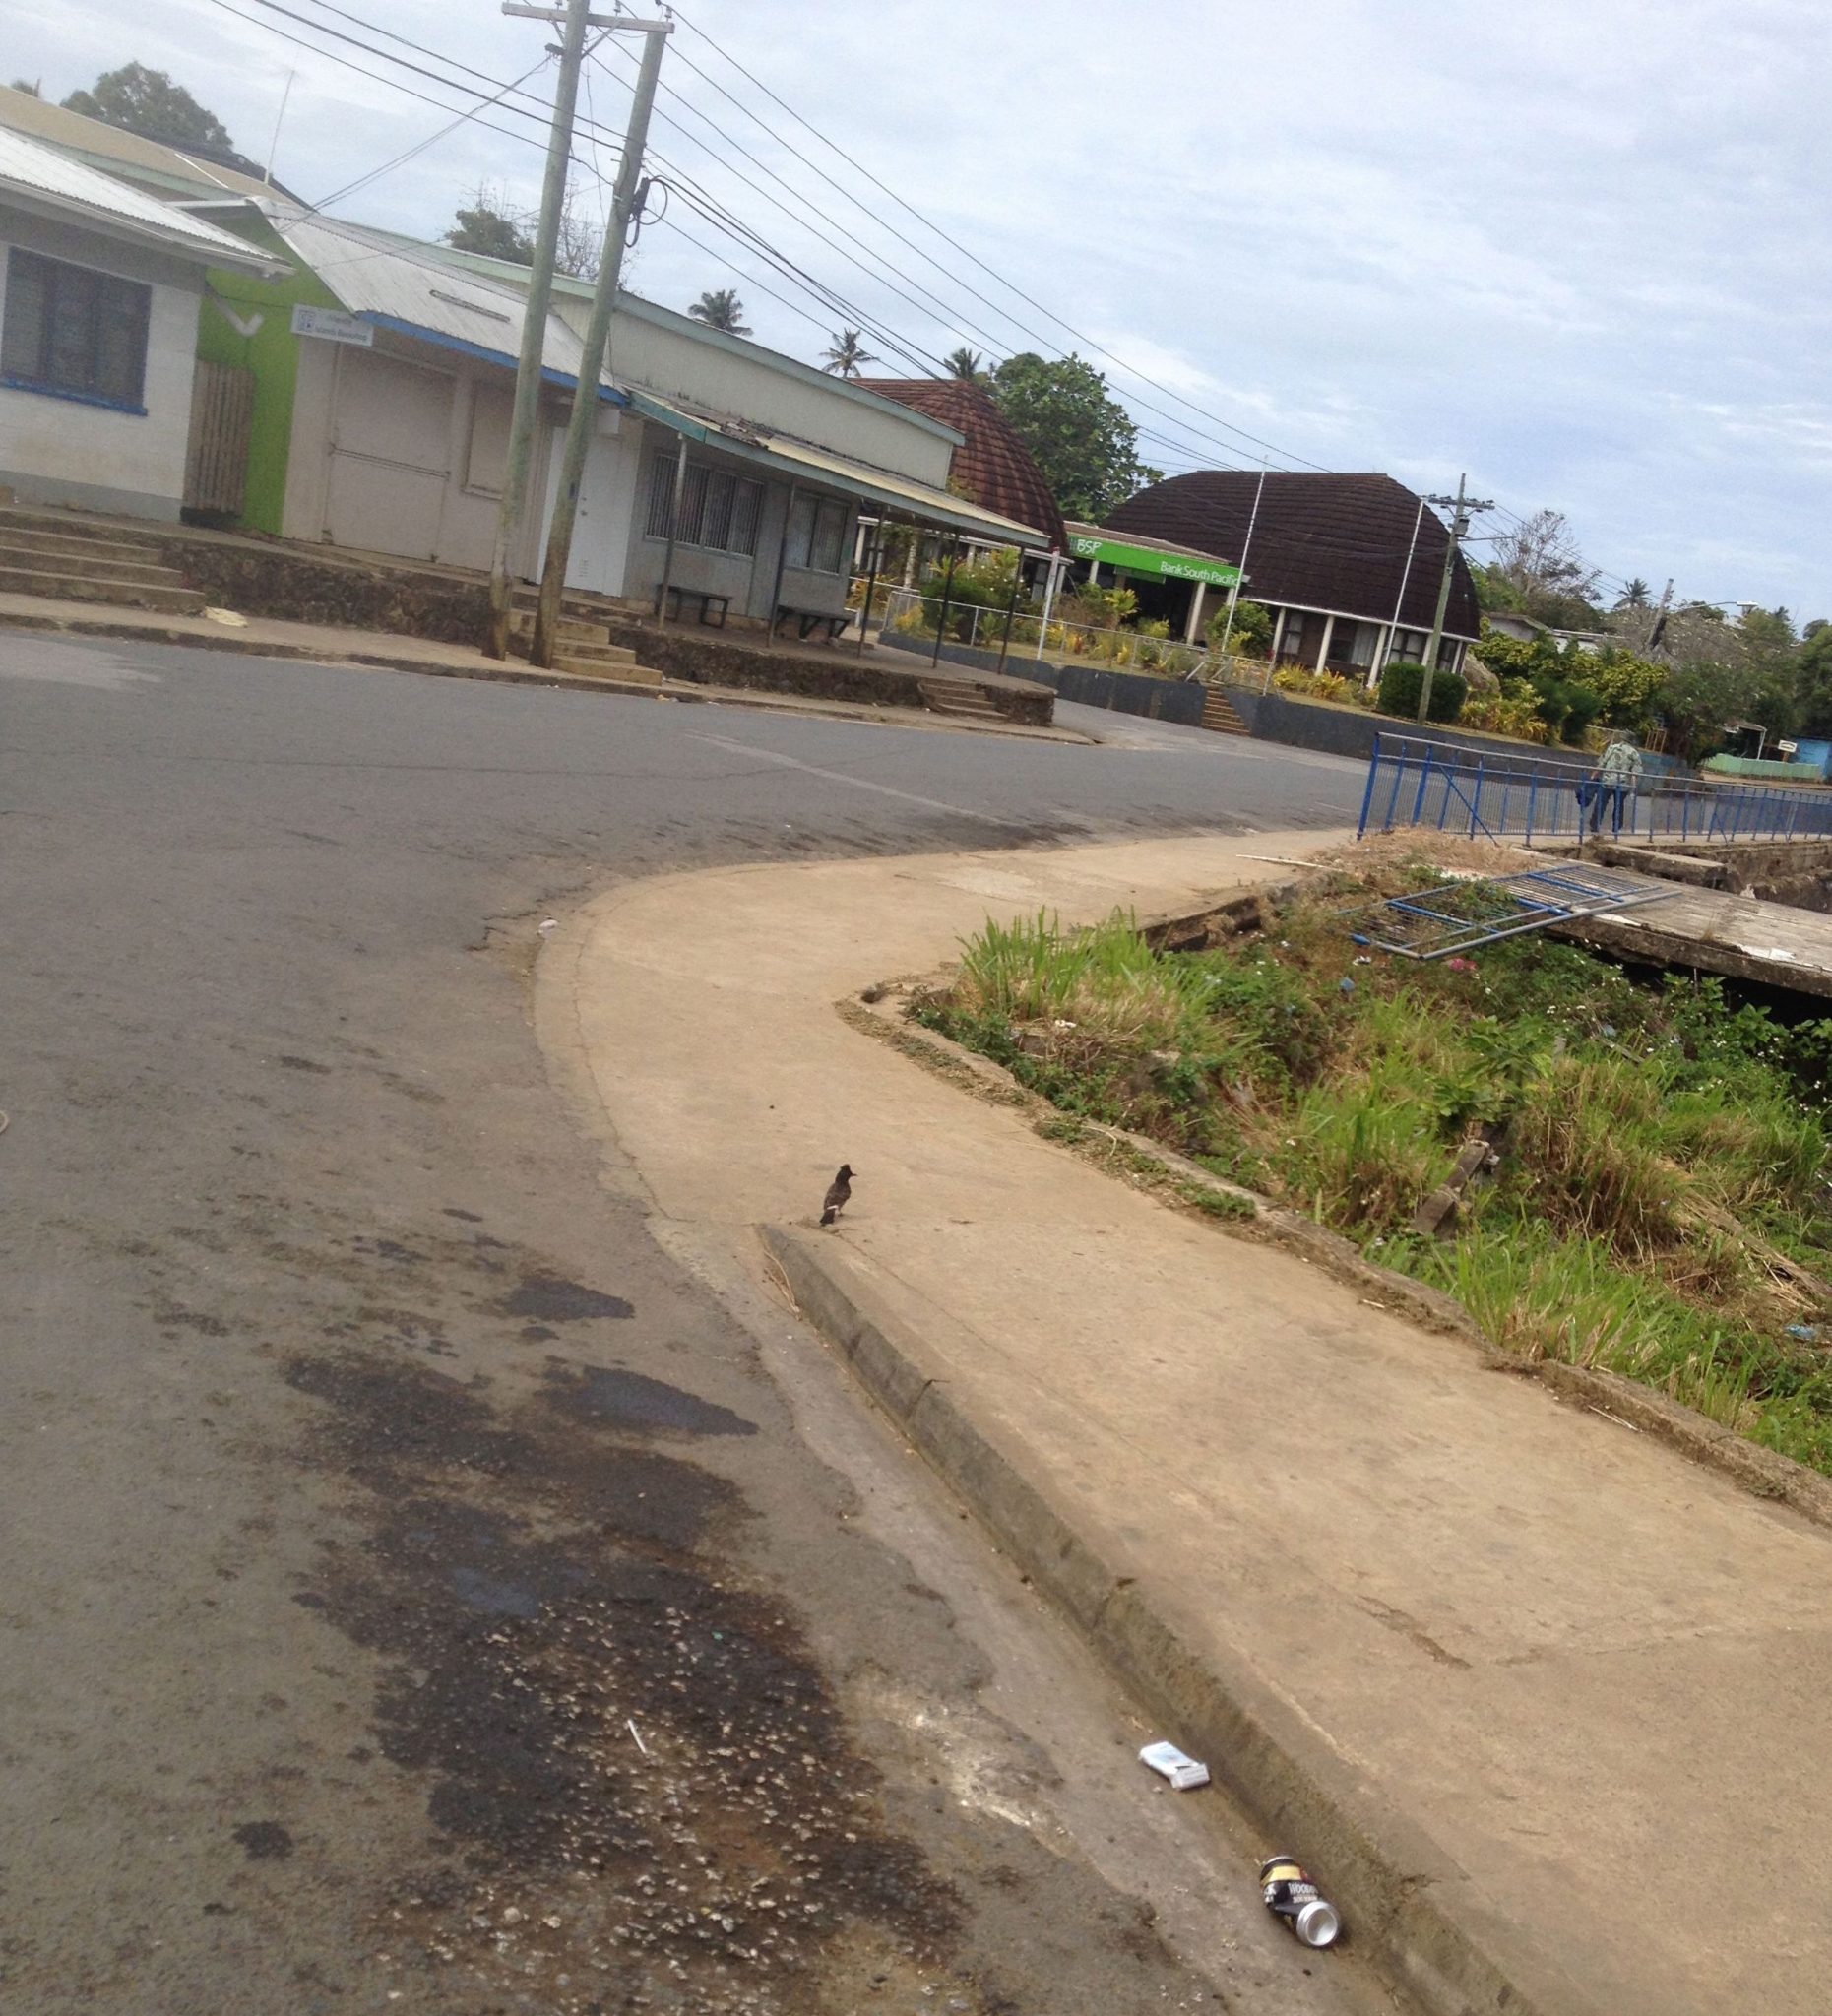 14. After church, Neiafu is almost totally deserted because families get together to have feasts, or people stay home to relax. On the sidewalk is a red vented bulbul, an alien species of bird, surveys the quiet town of Neiafu on this Sunday morning